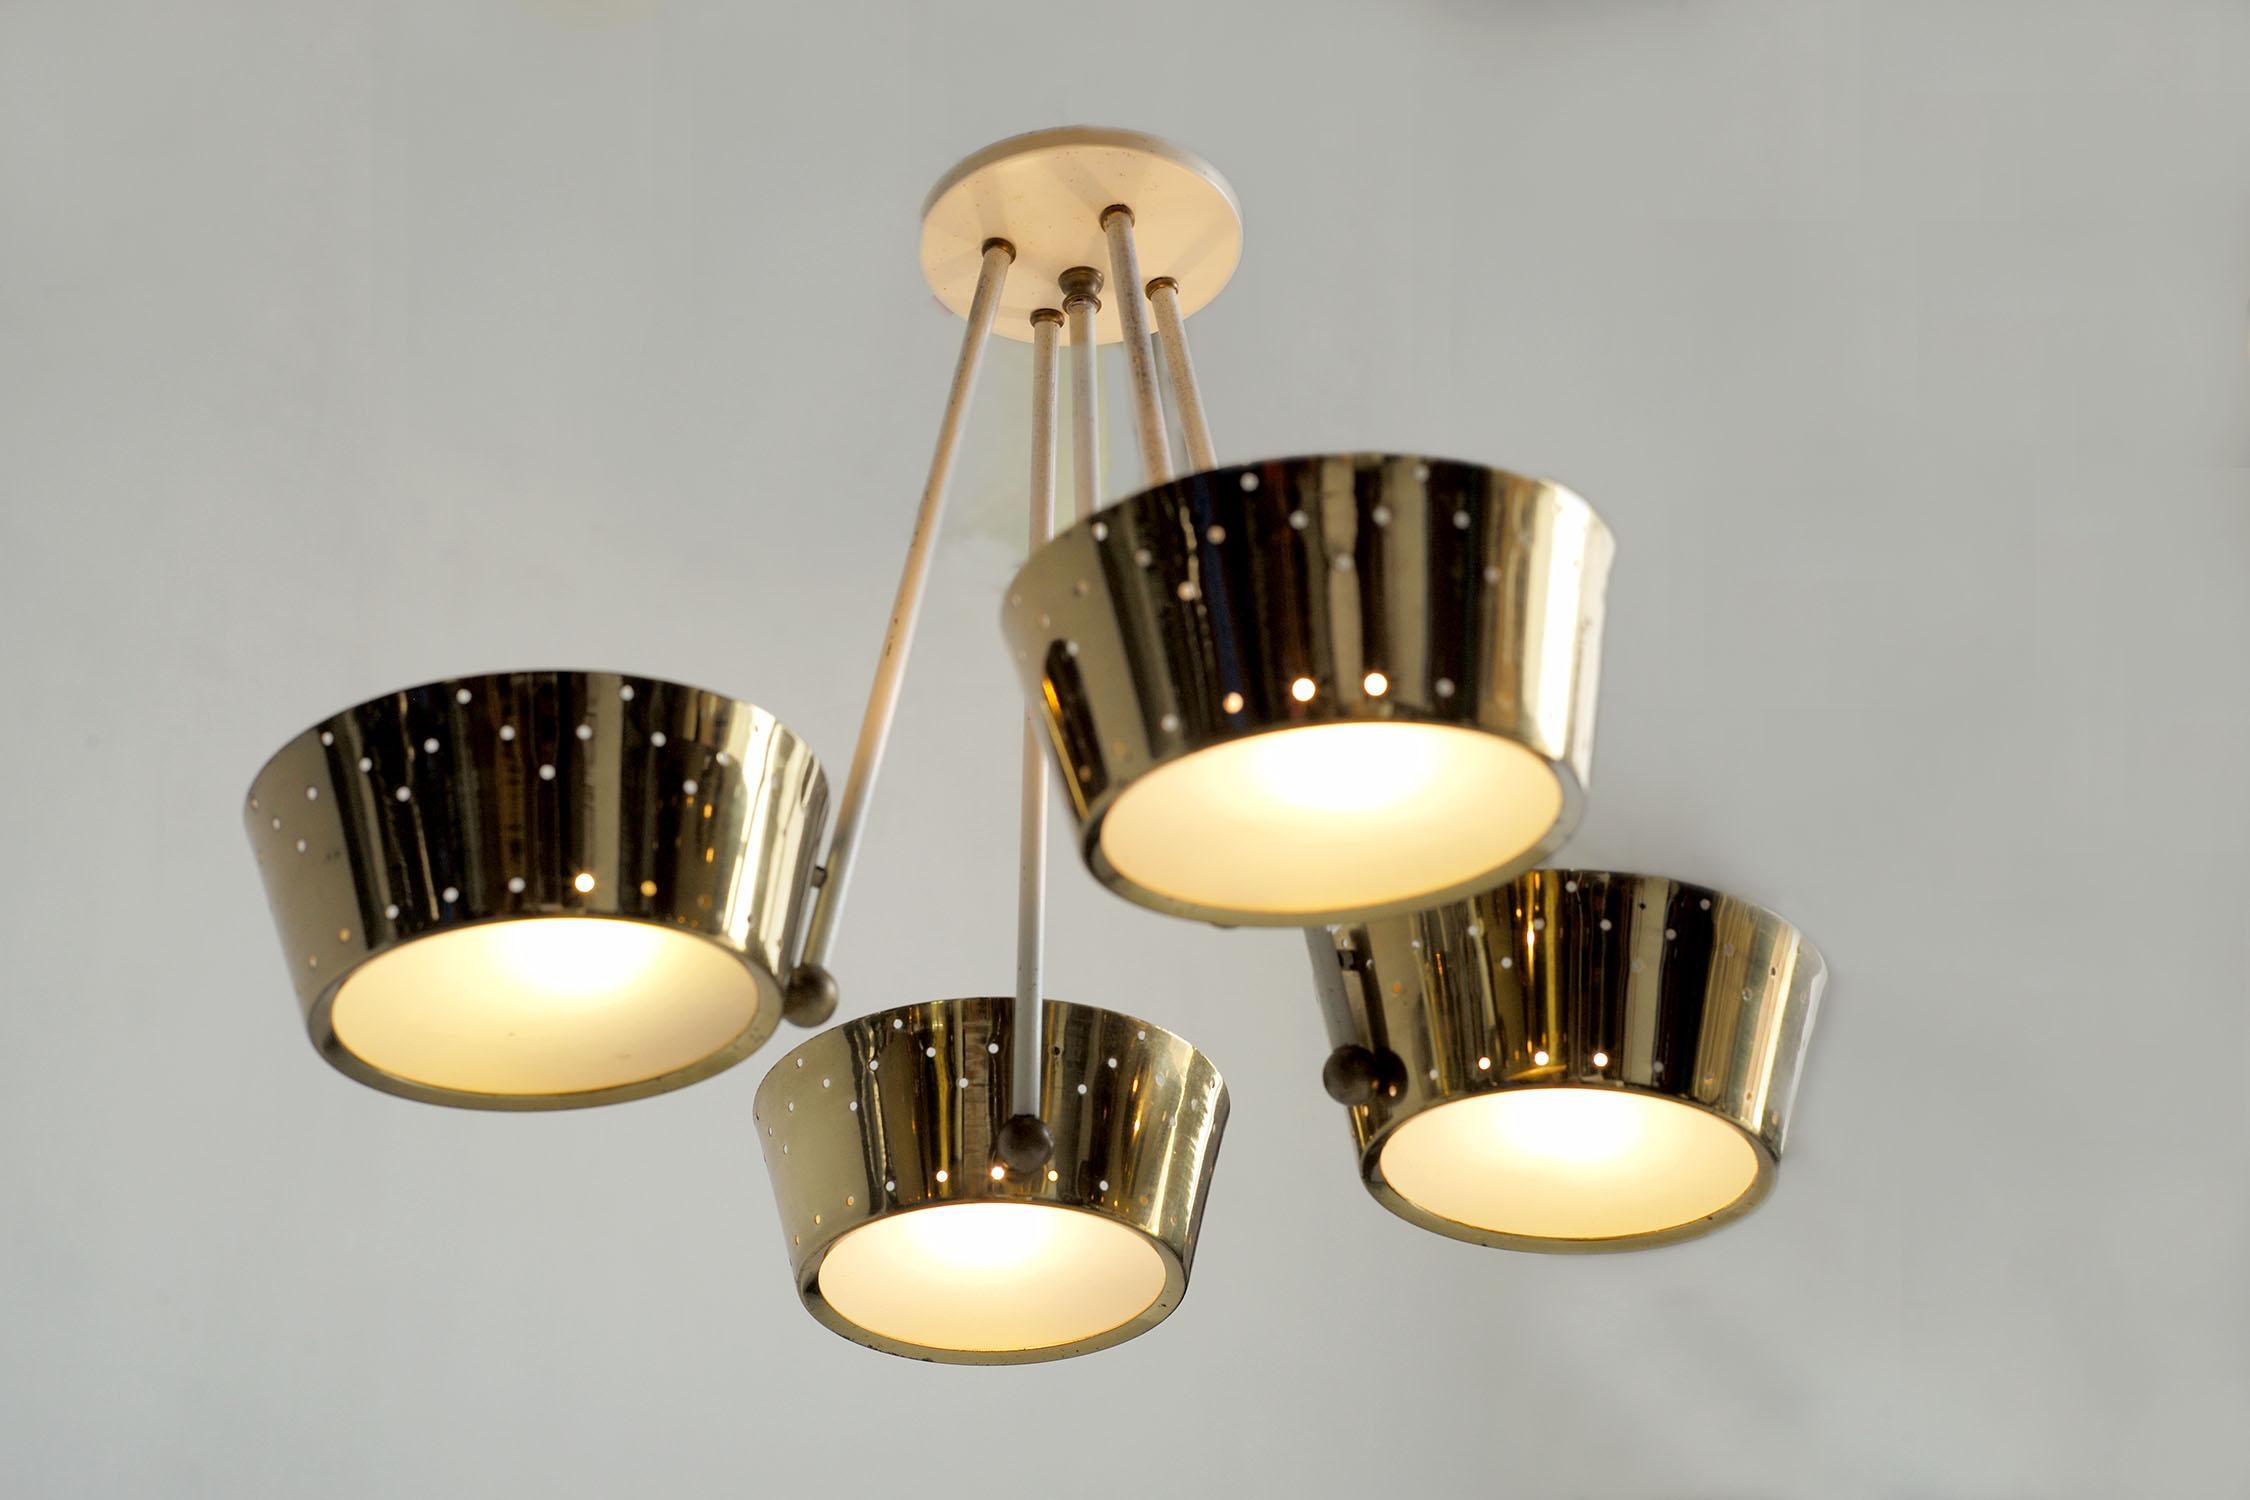 Suspension attributed to Lightolier, in the style of Paavo Tynell, with four polished and perforated brass reflectors, USA 1950. The basin-shaped reflectors receive a frosted glass plate, the structure is white lacquered, enhanced by golden balls.